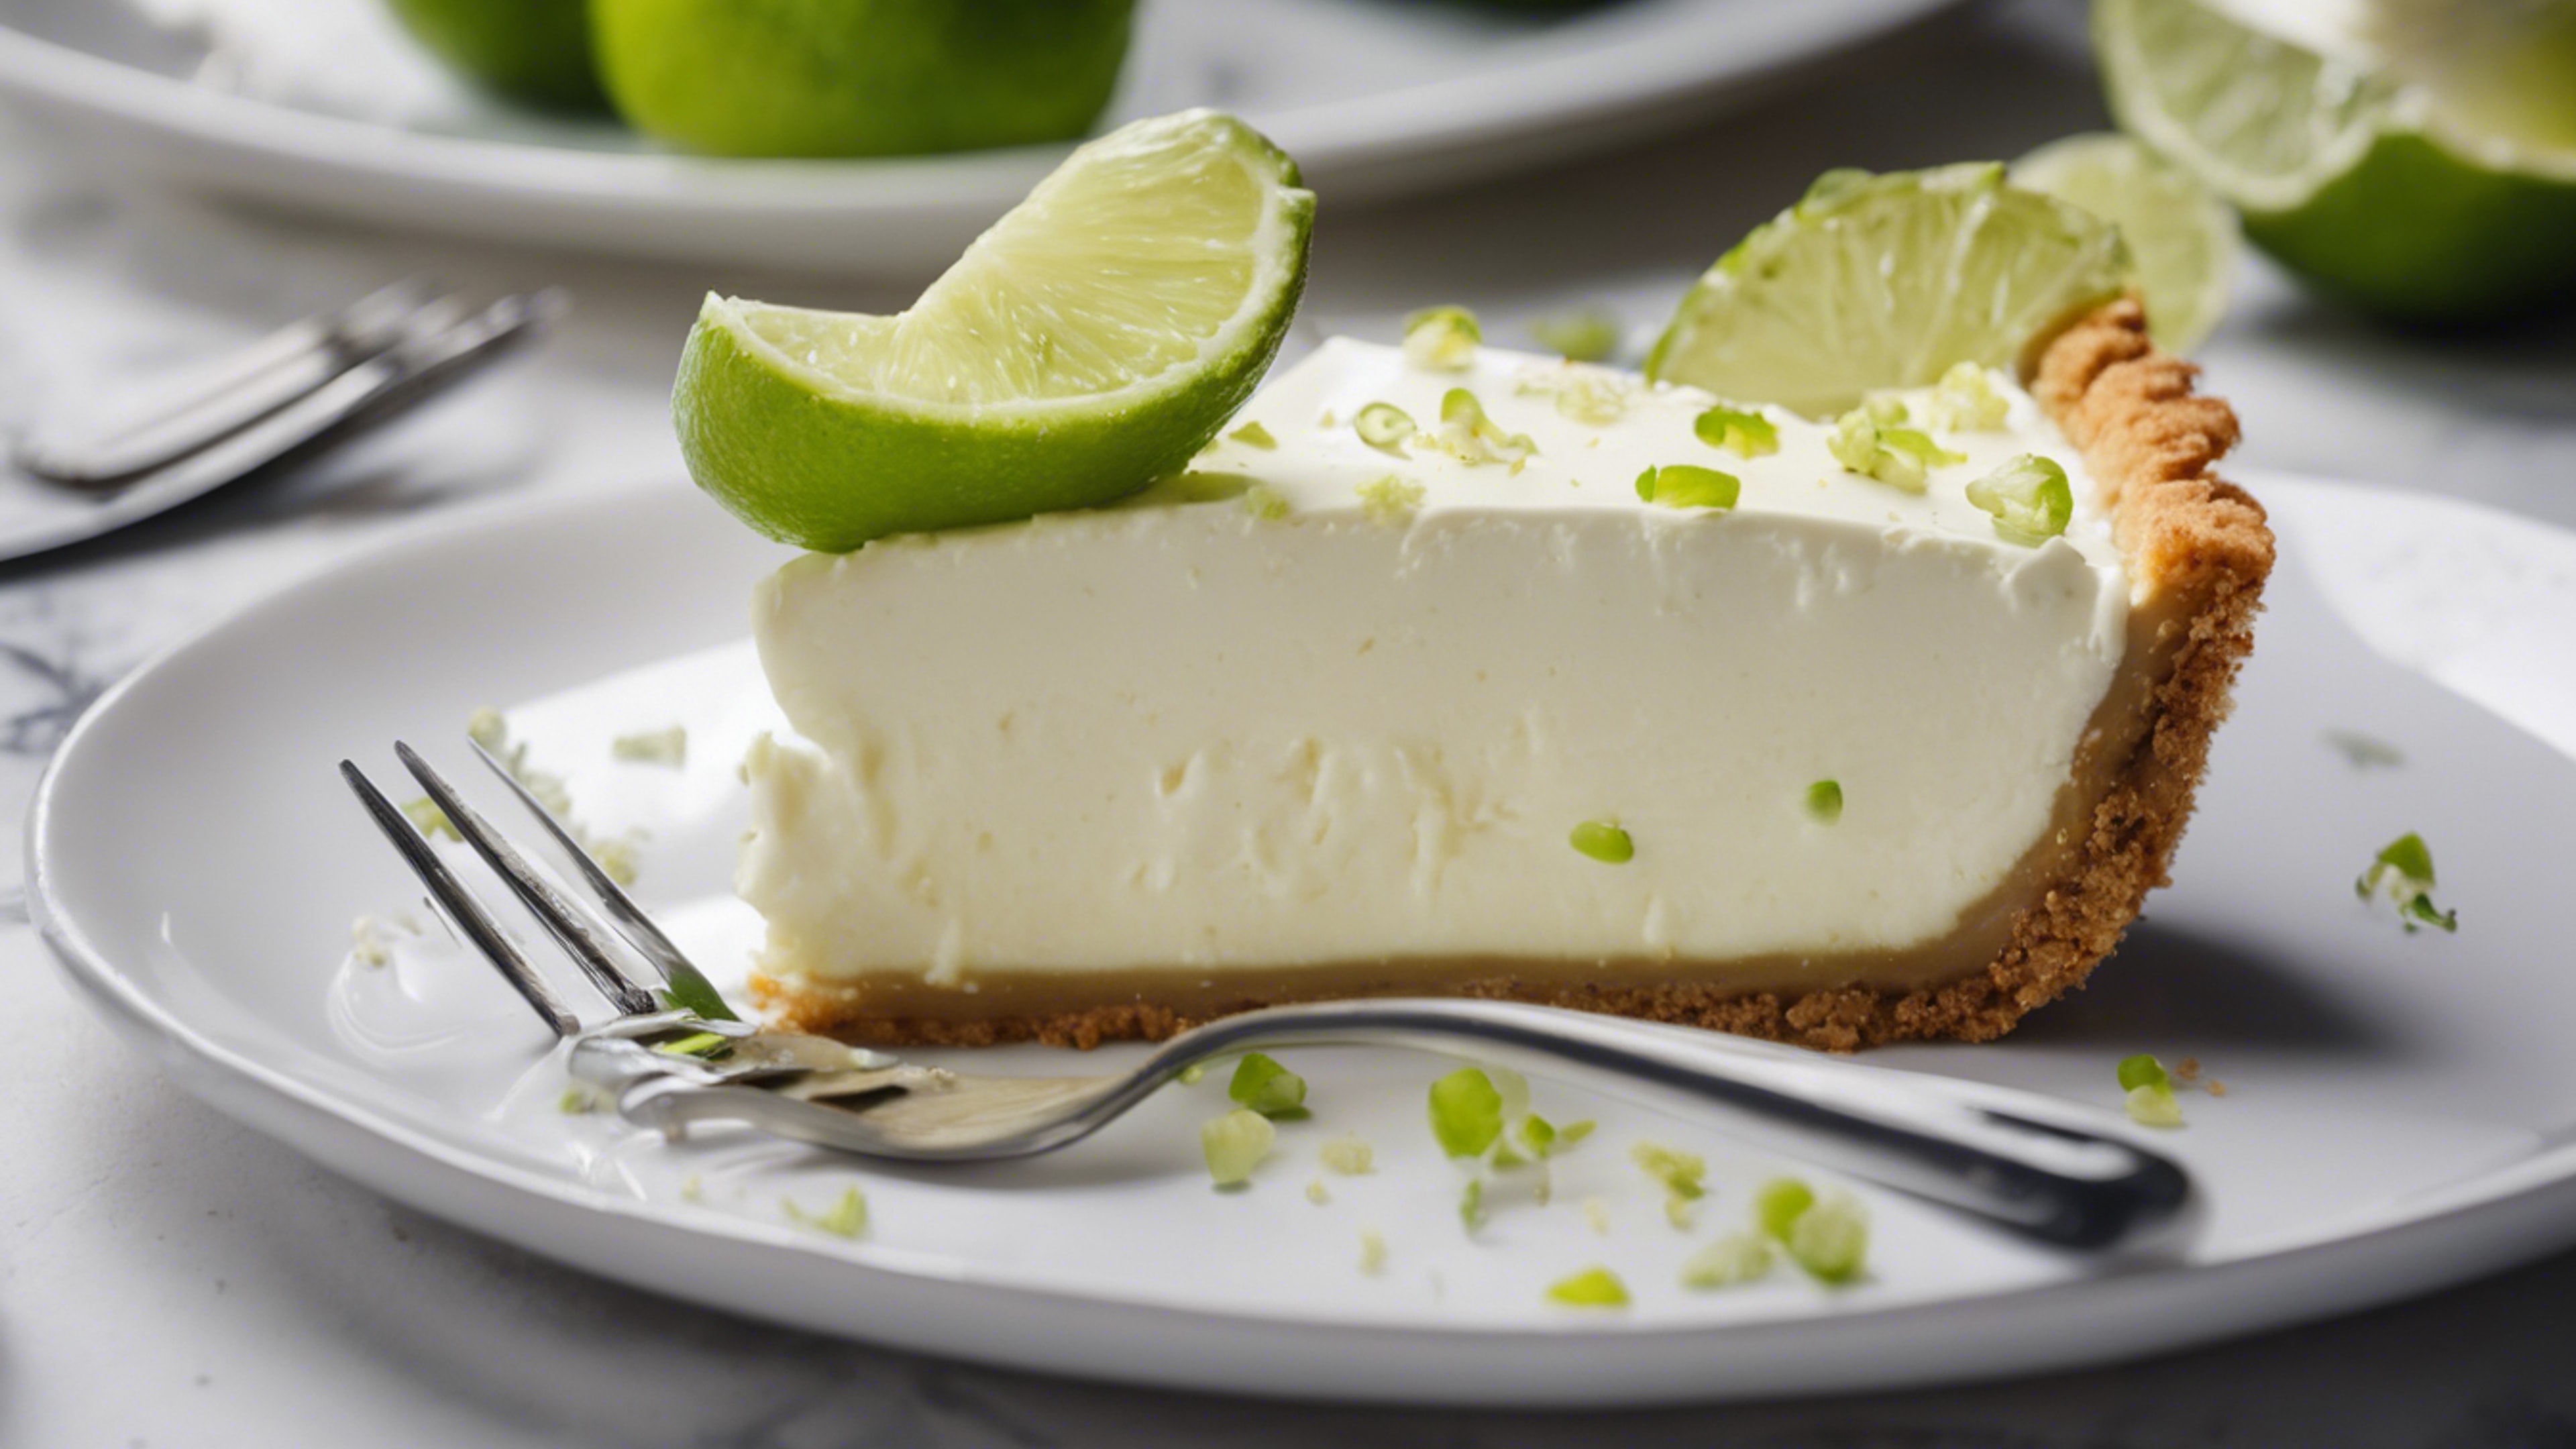 Delicious key lime pie served on a white ceramic plate with a silver fork. Fondo de pantalla[dc9d1e1923f243919b66]